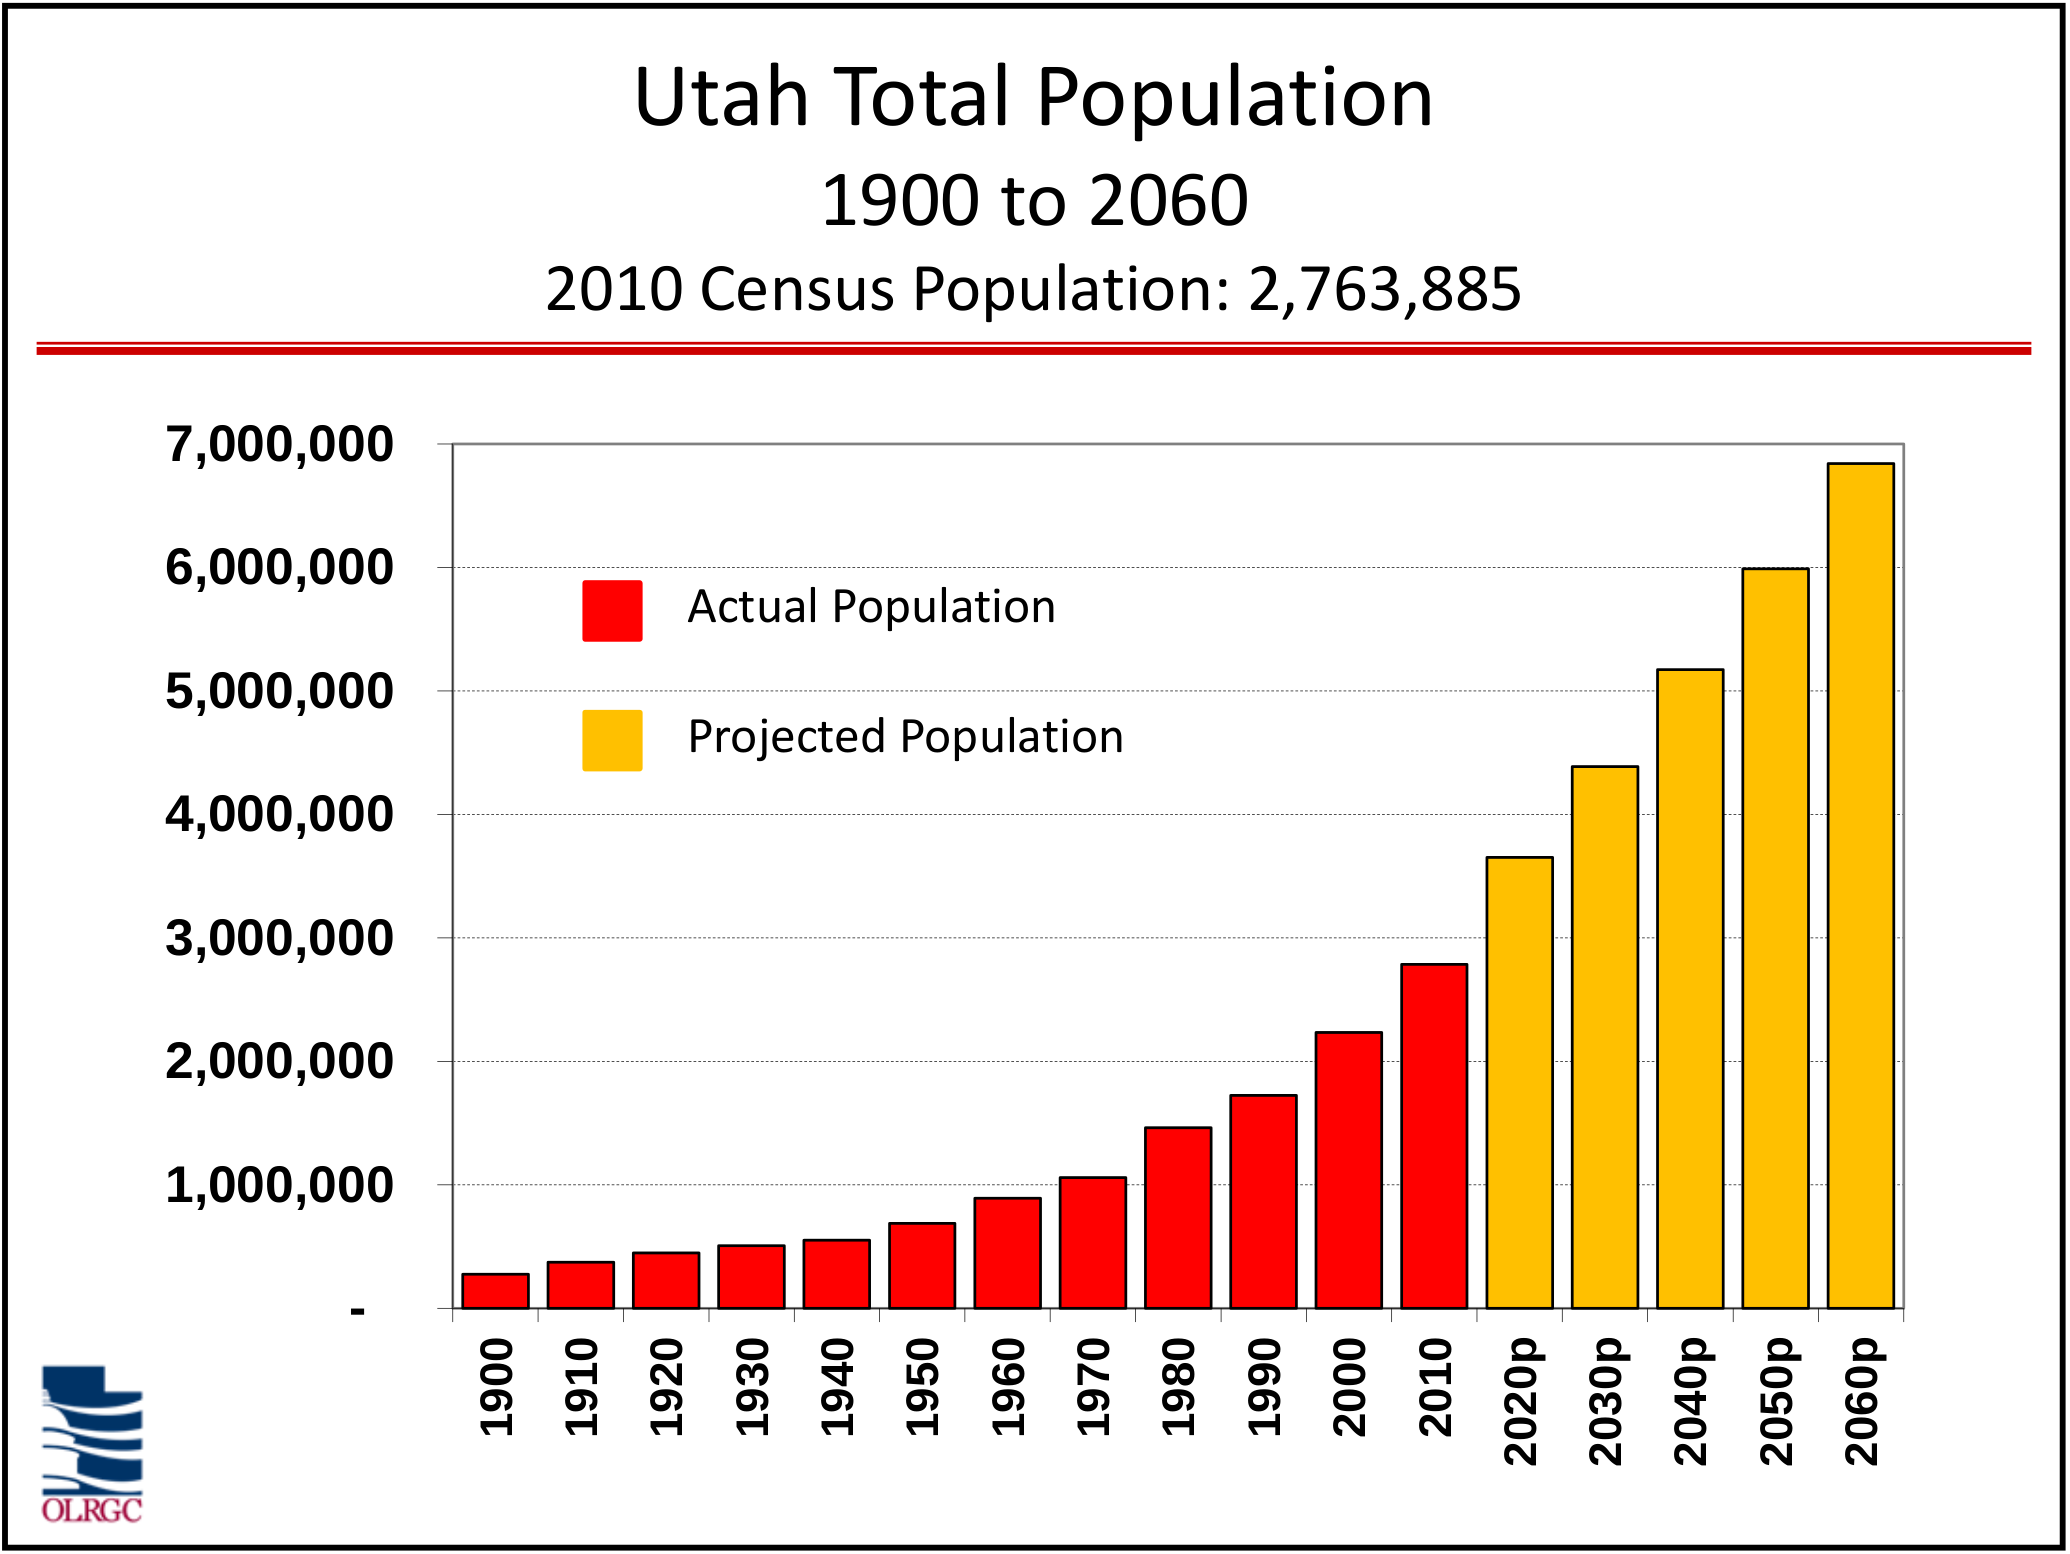 Small Families (It's Okay to Plan) Utah Population & Environment Council